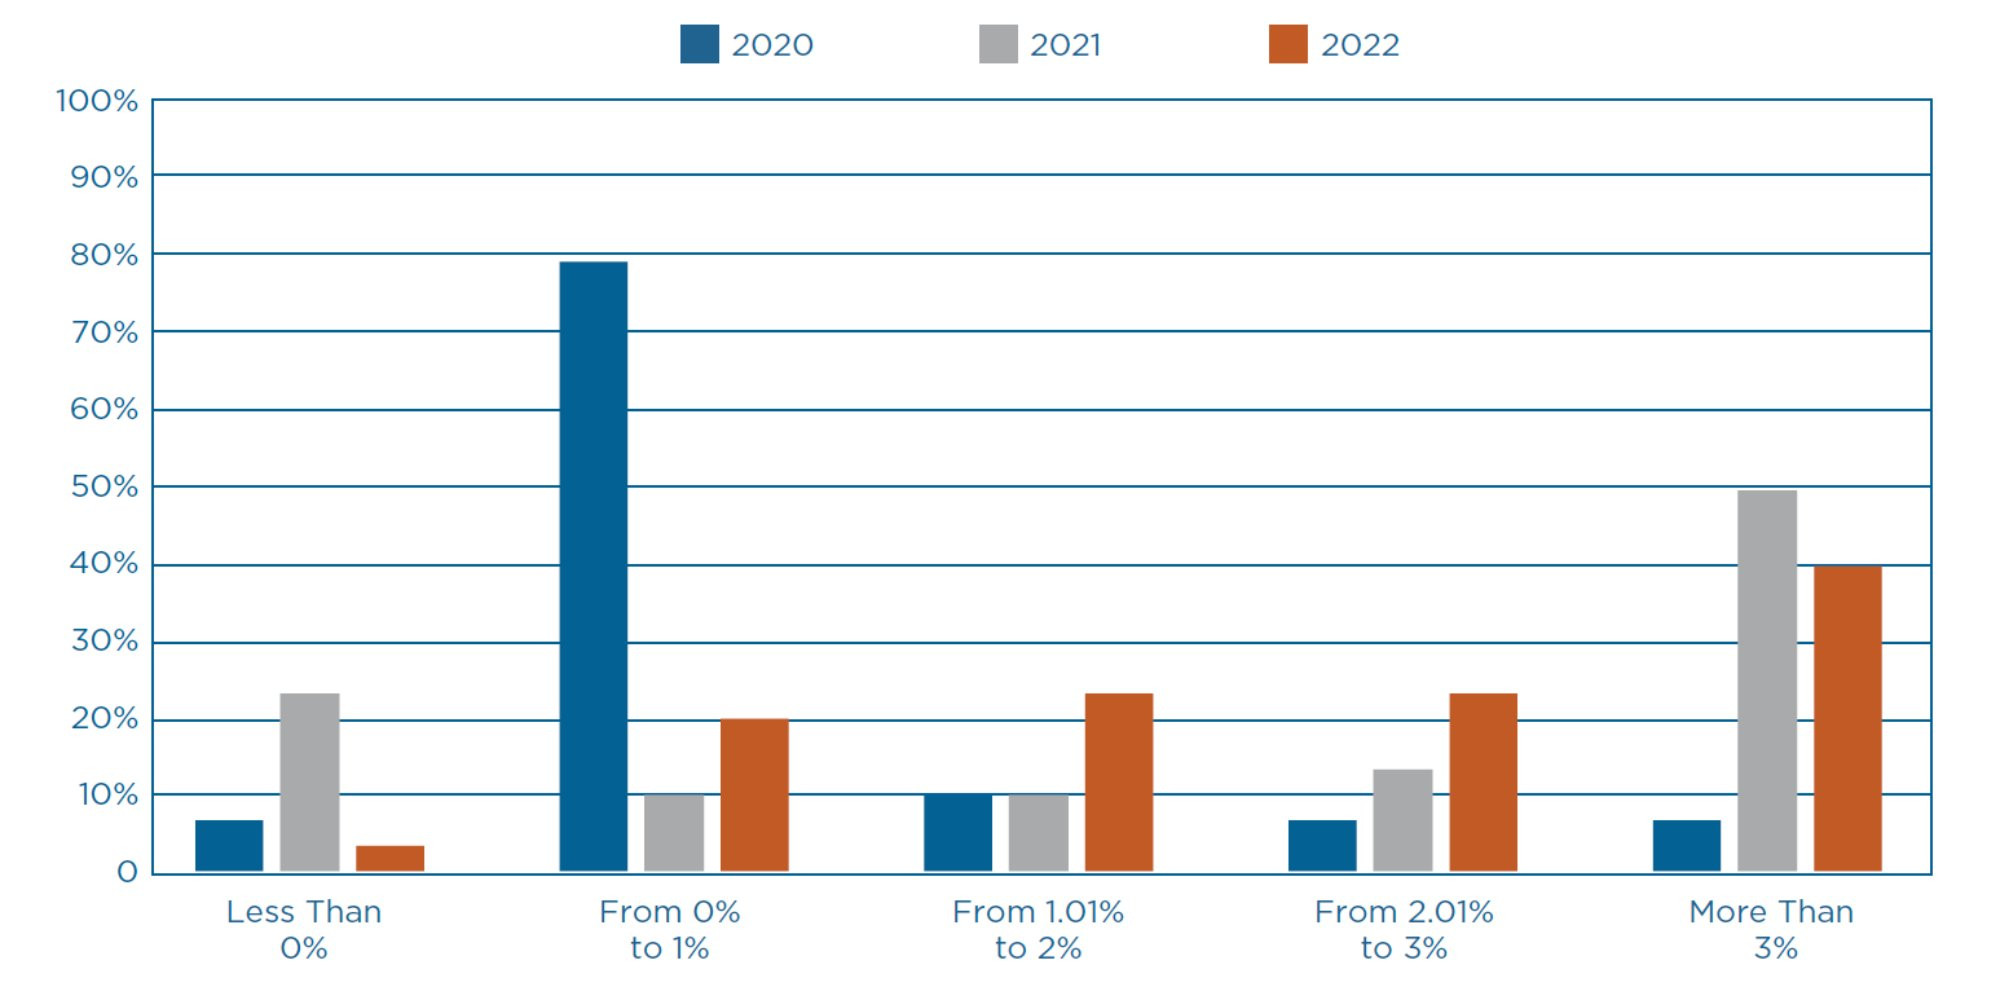 Chart of Repondents' Anticipated Change in Employment for 2022